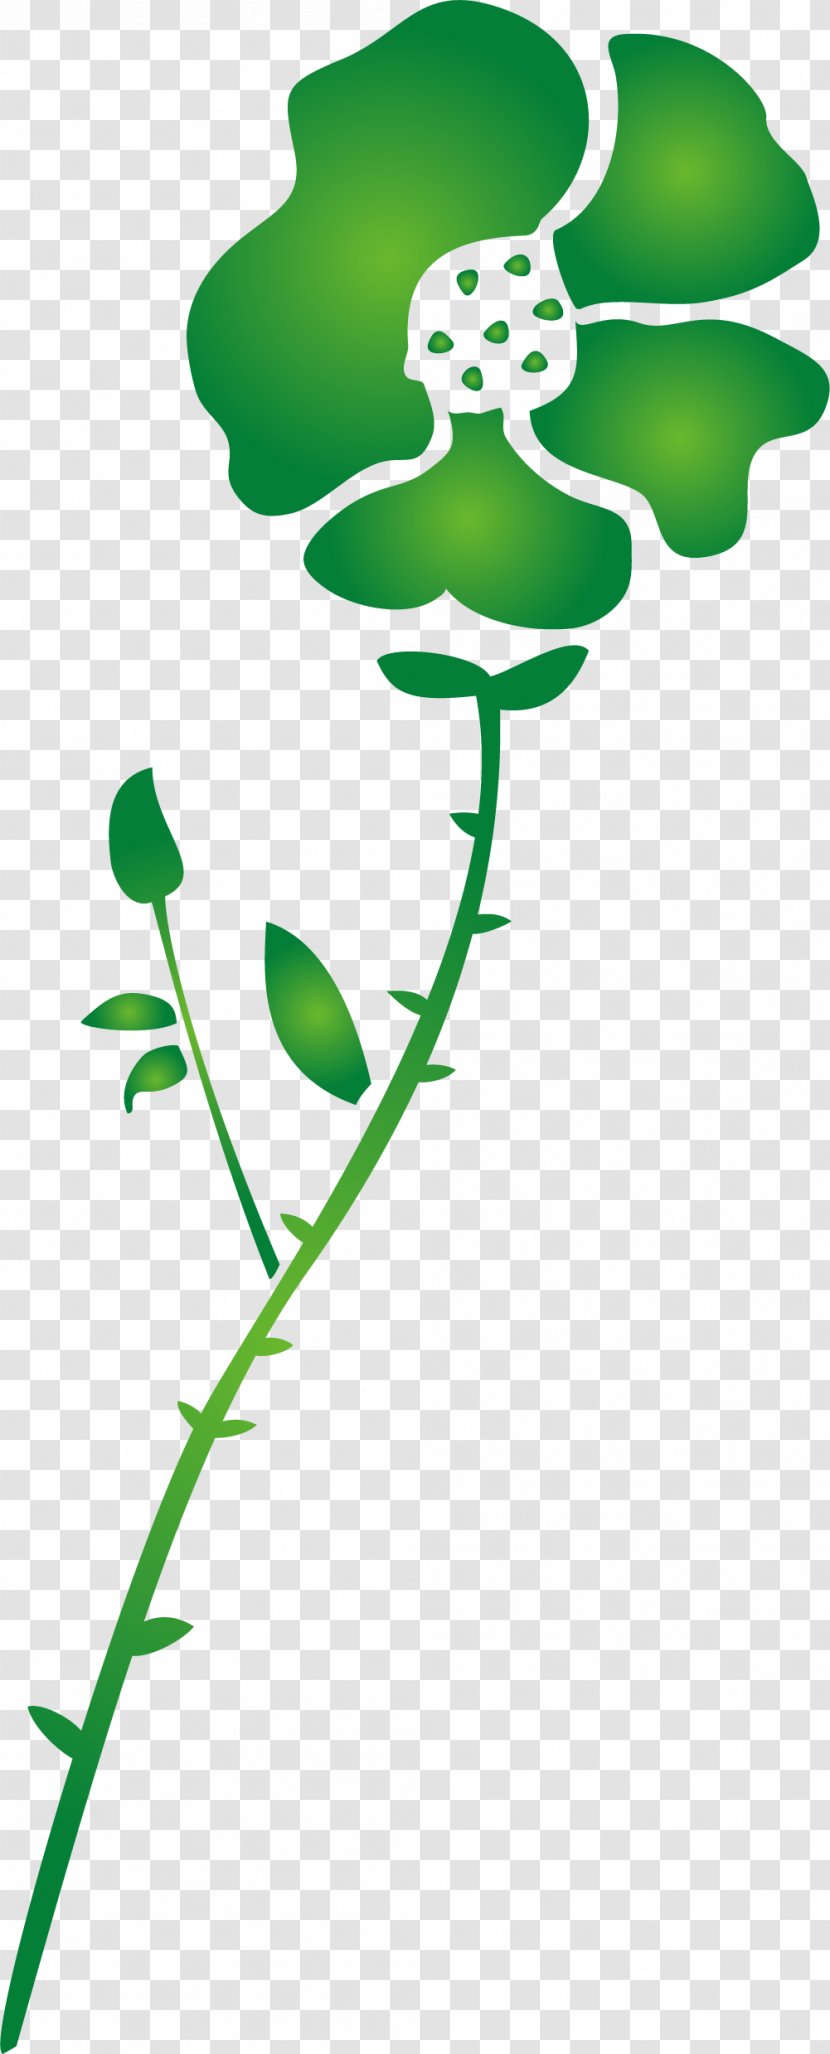 Clip Art - Leaf - Hand Painted Green Flowers Transparent PNG